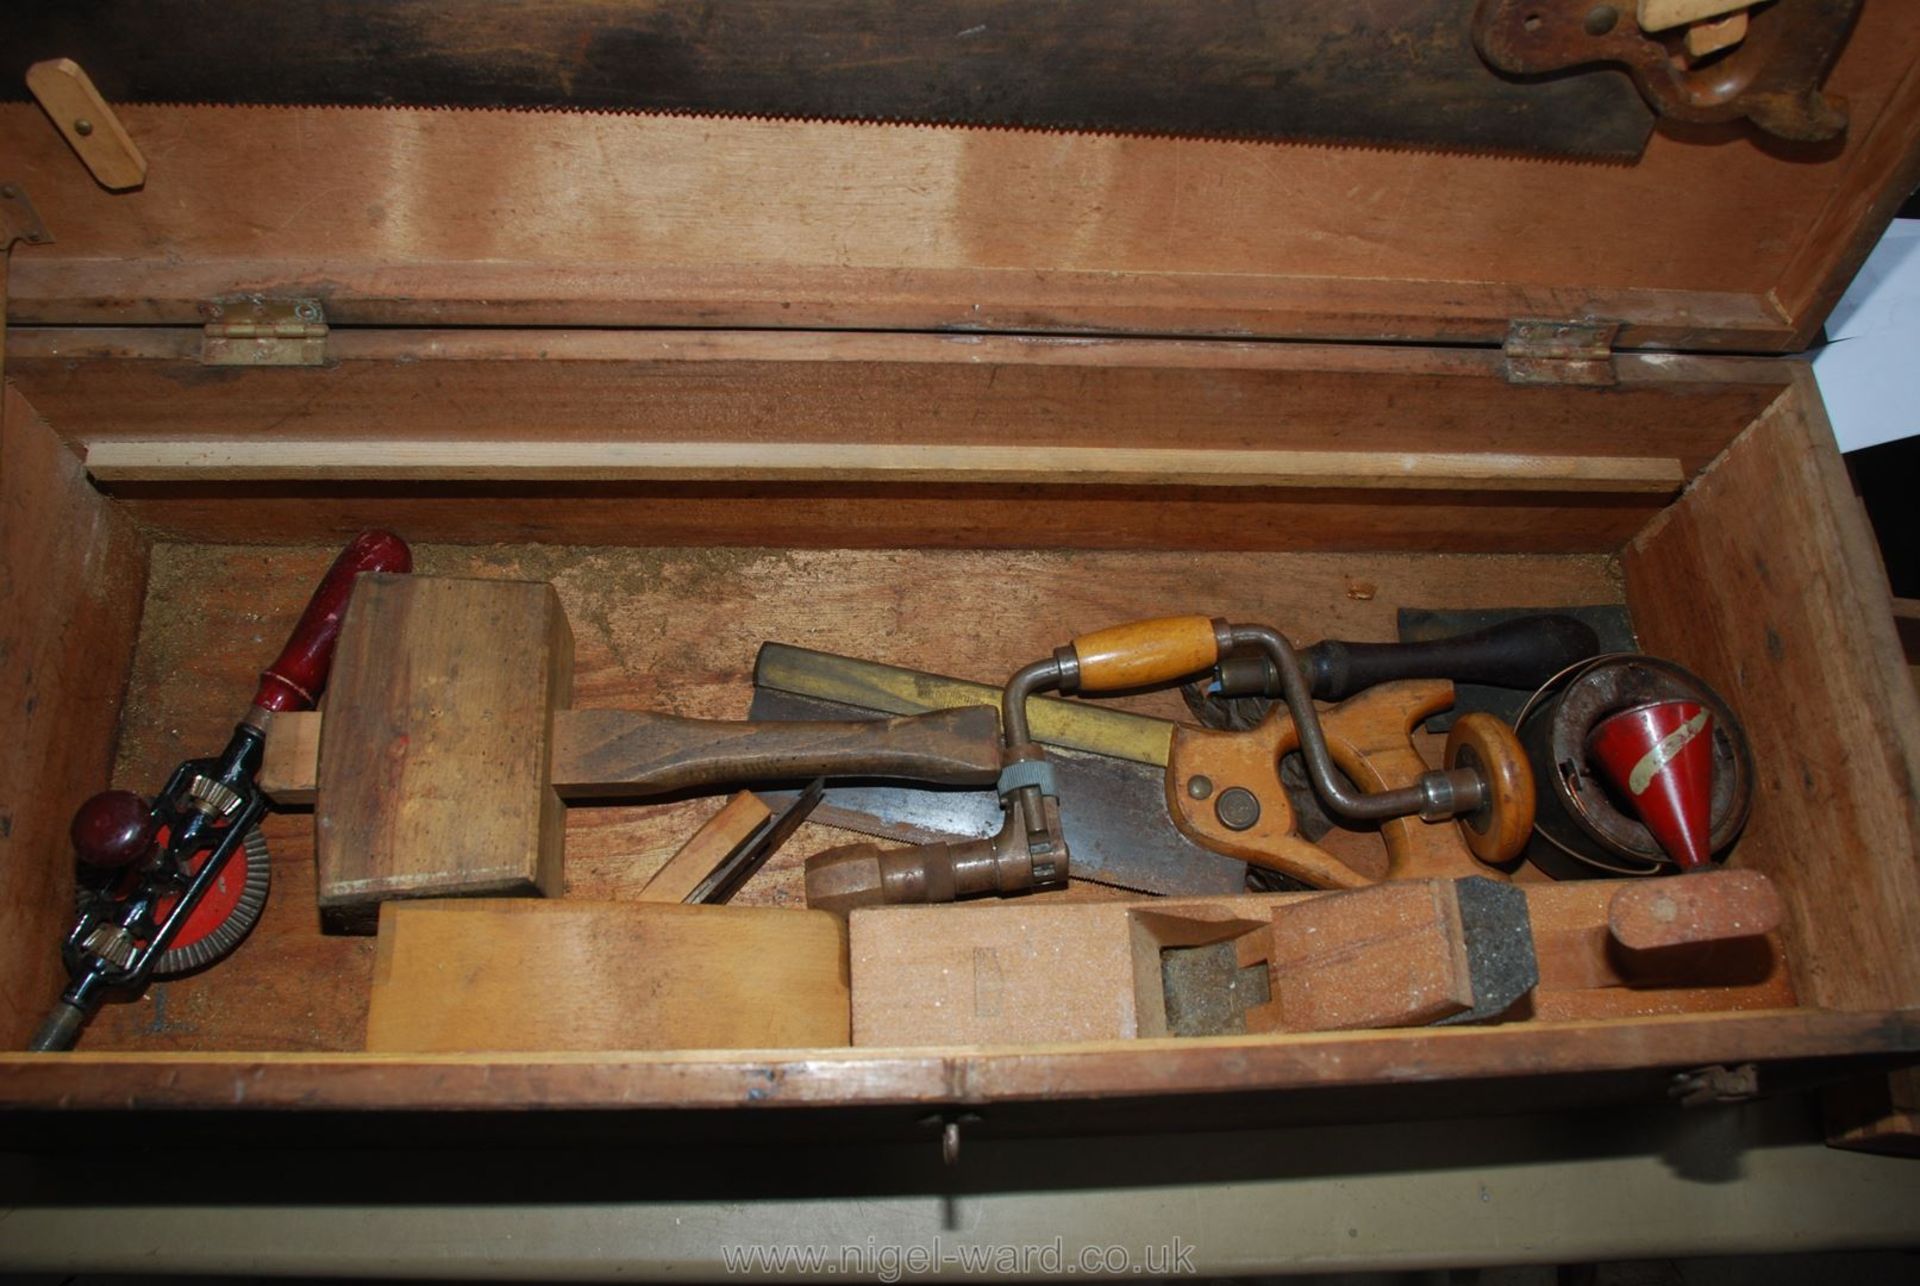 Carpenters tool box containing various saws, planes, mallets, drills etc. - Image 4 of 4